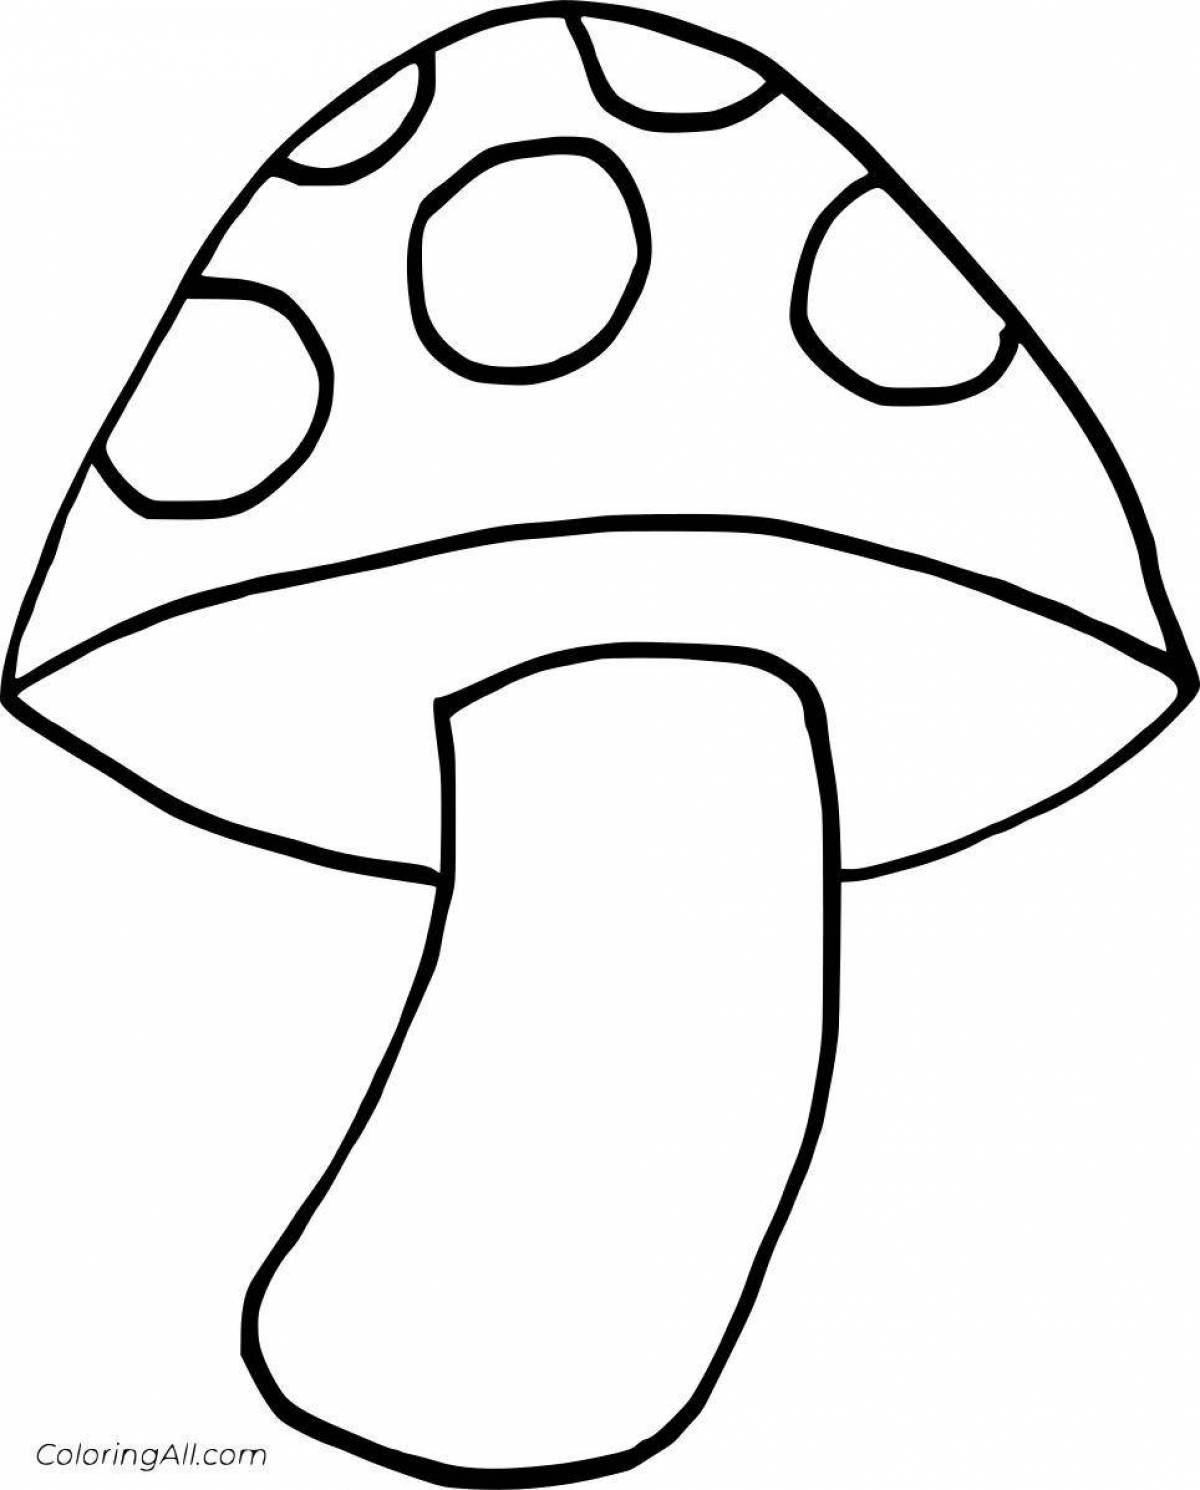 Coloring page mysterious fungus